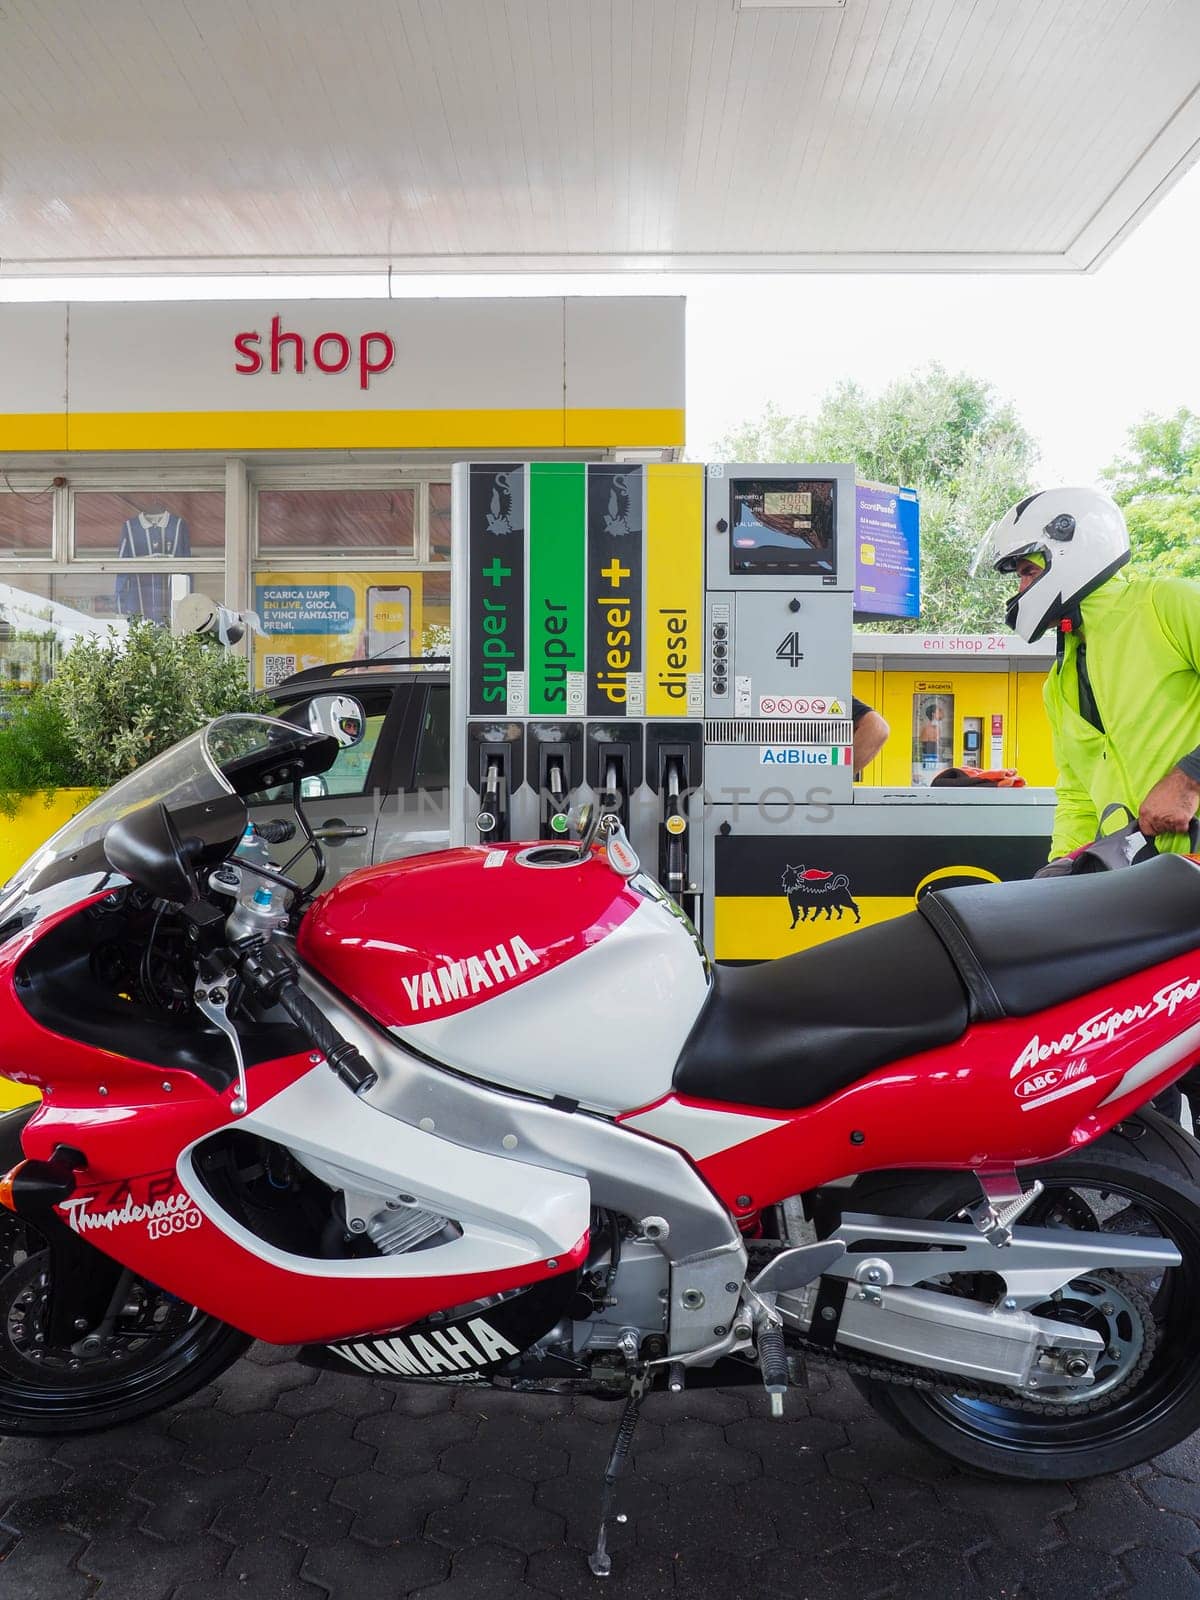 motorbike and scooter refueling at gast station in the city by verbano